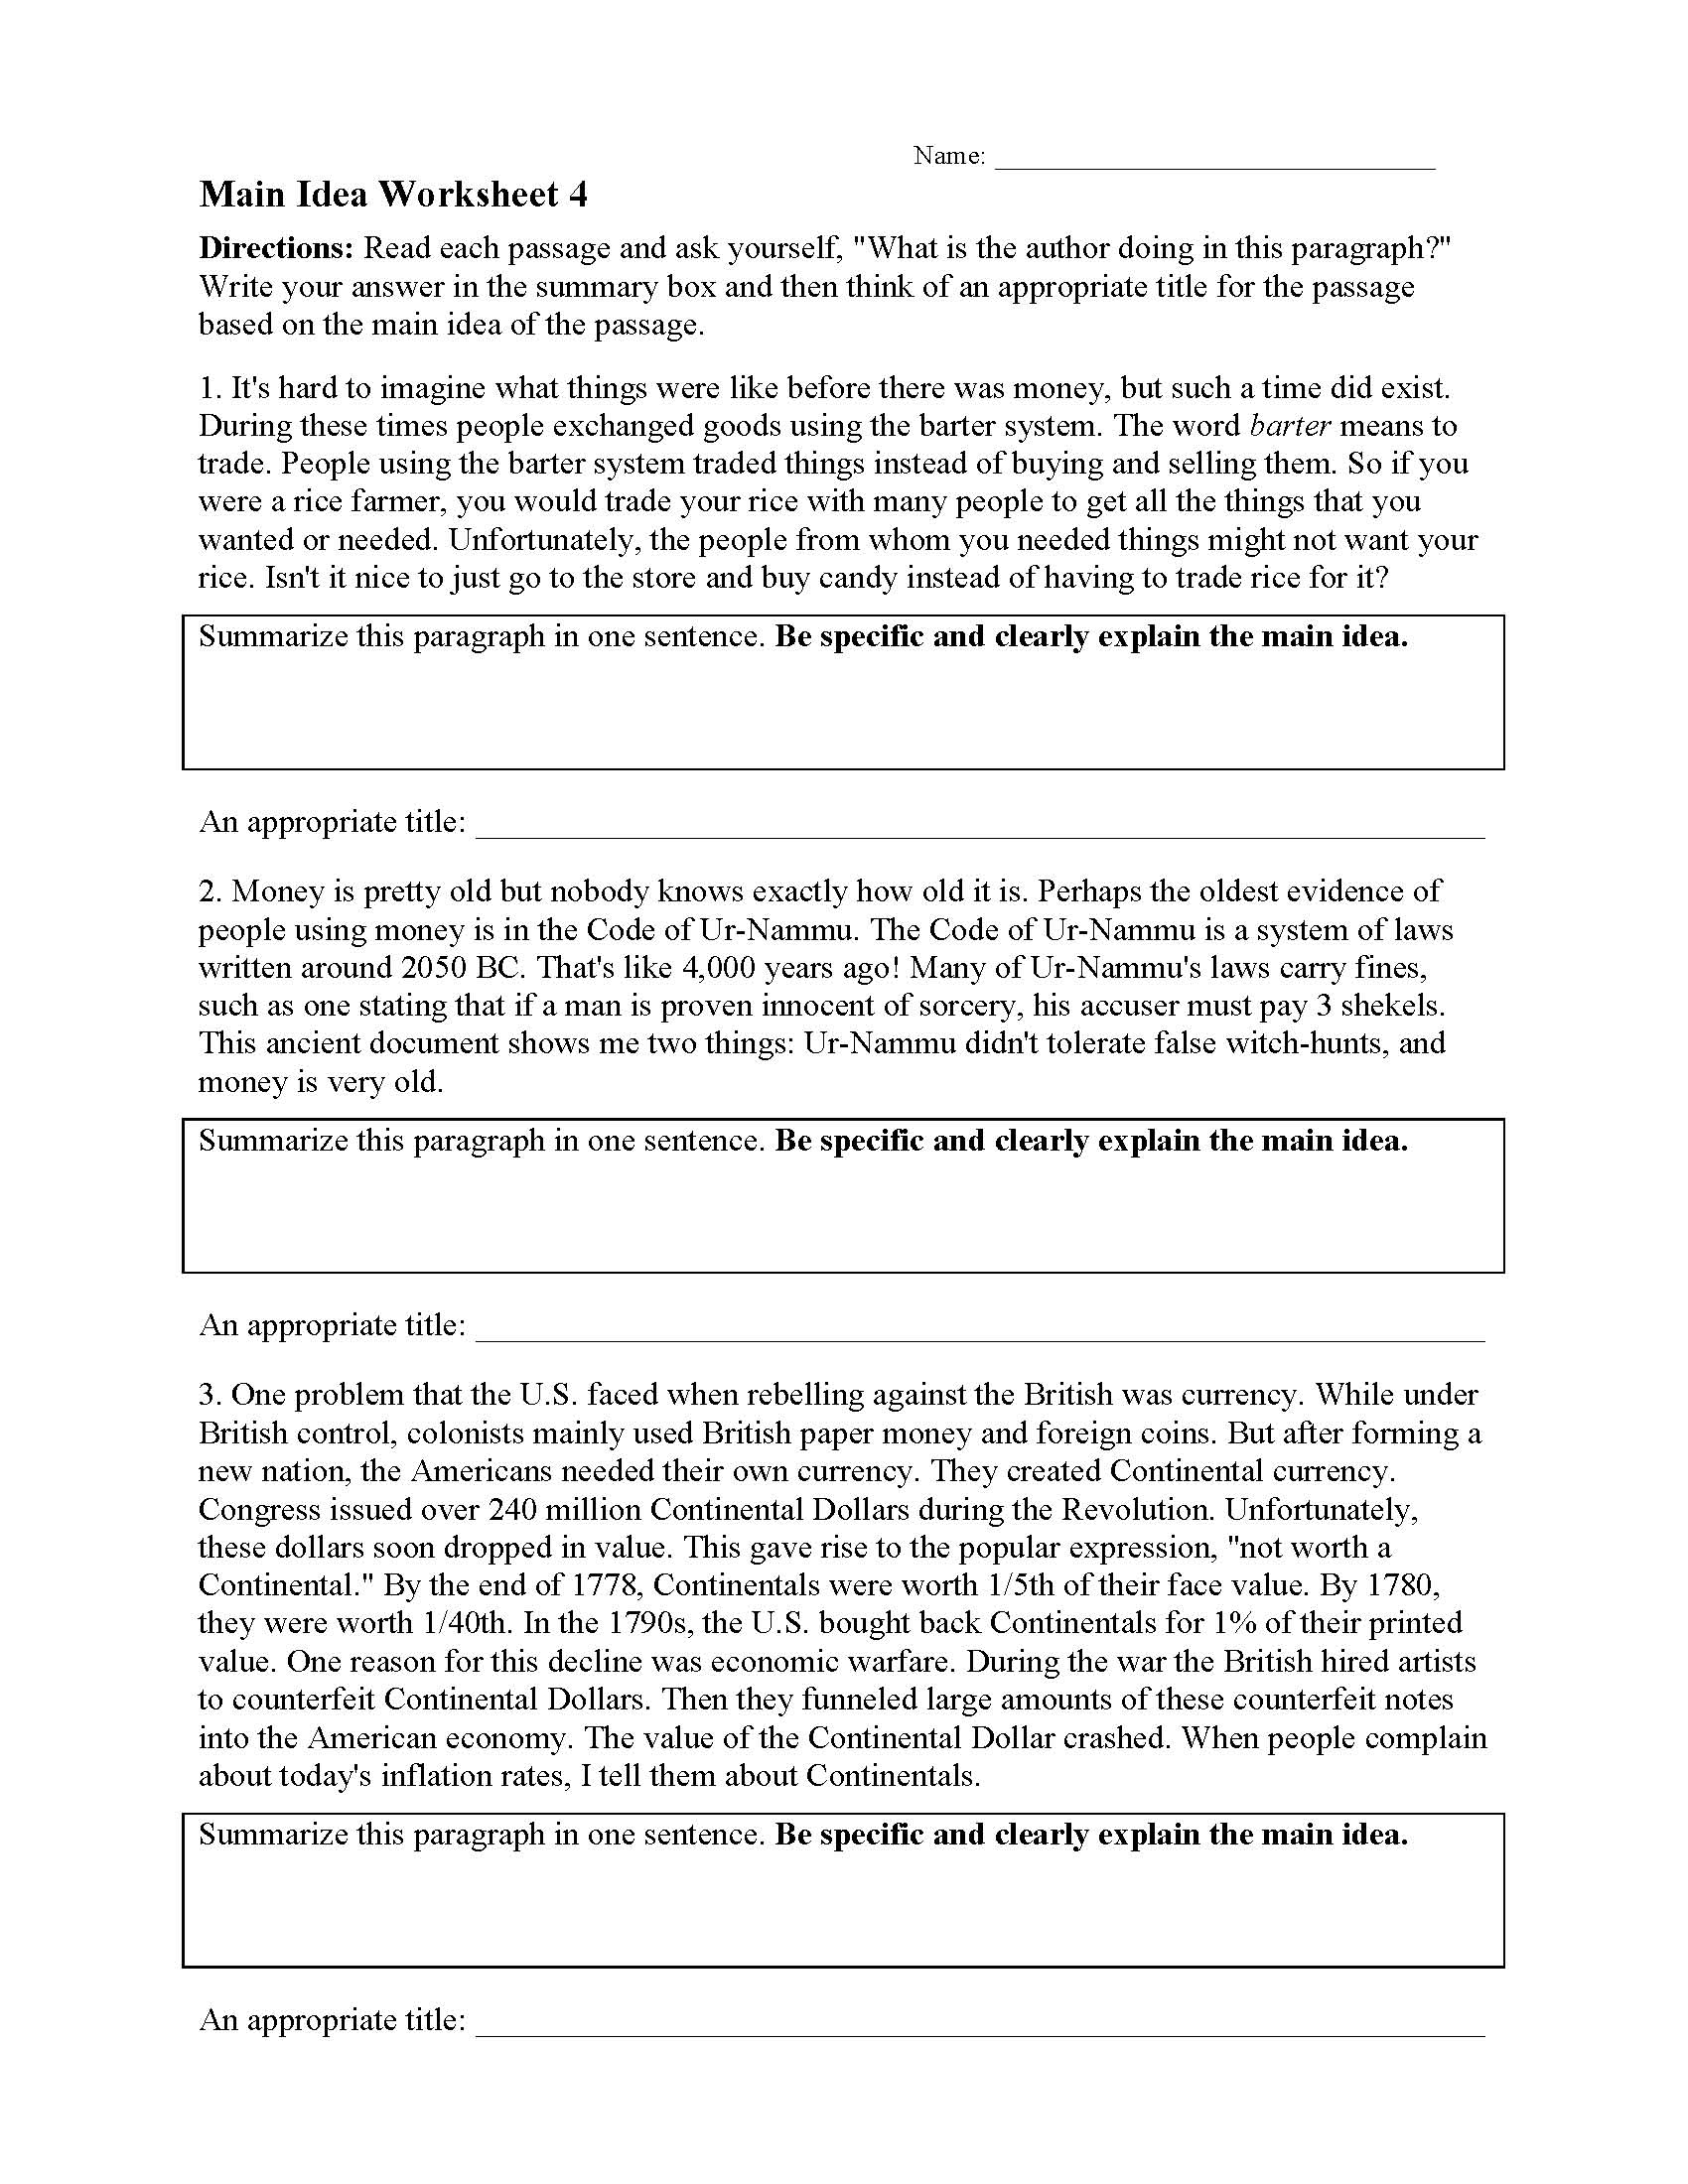 This is a preview image of Main Idea Worksheet 4. Click on it to enlarge it or view the source file.